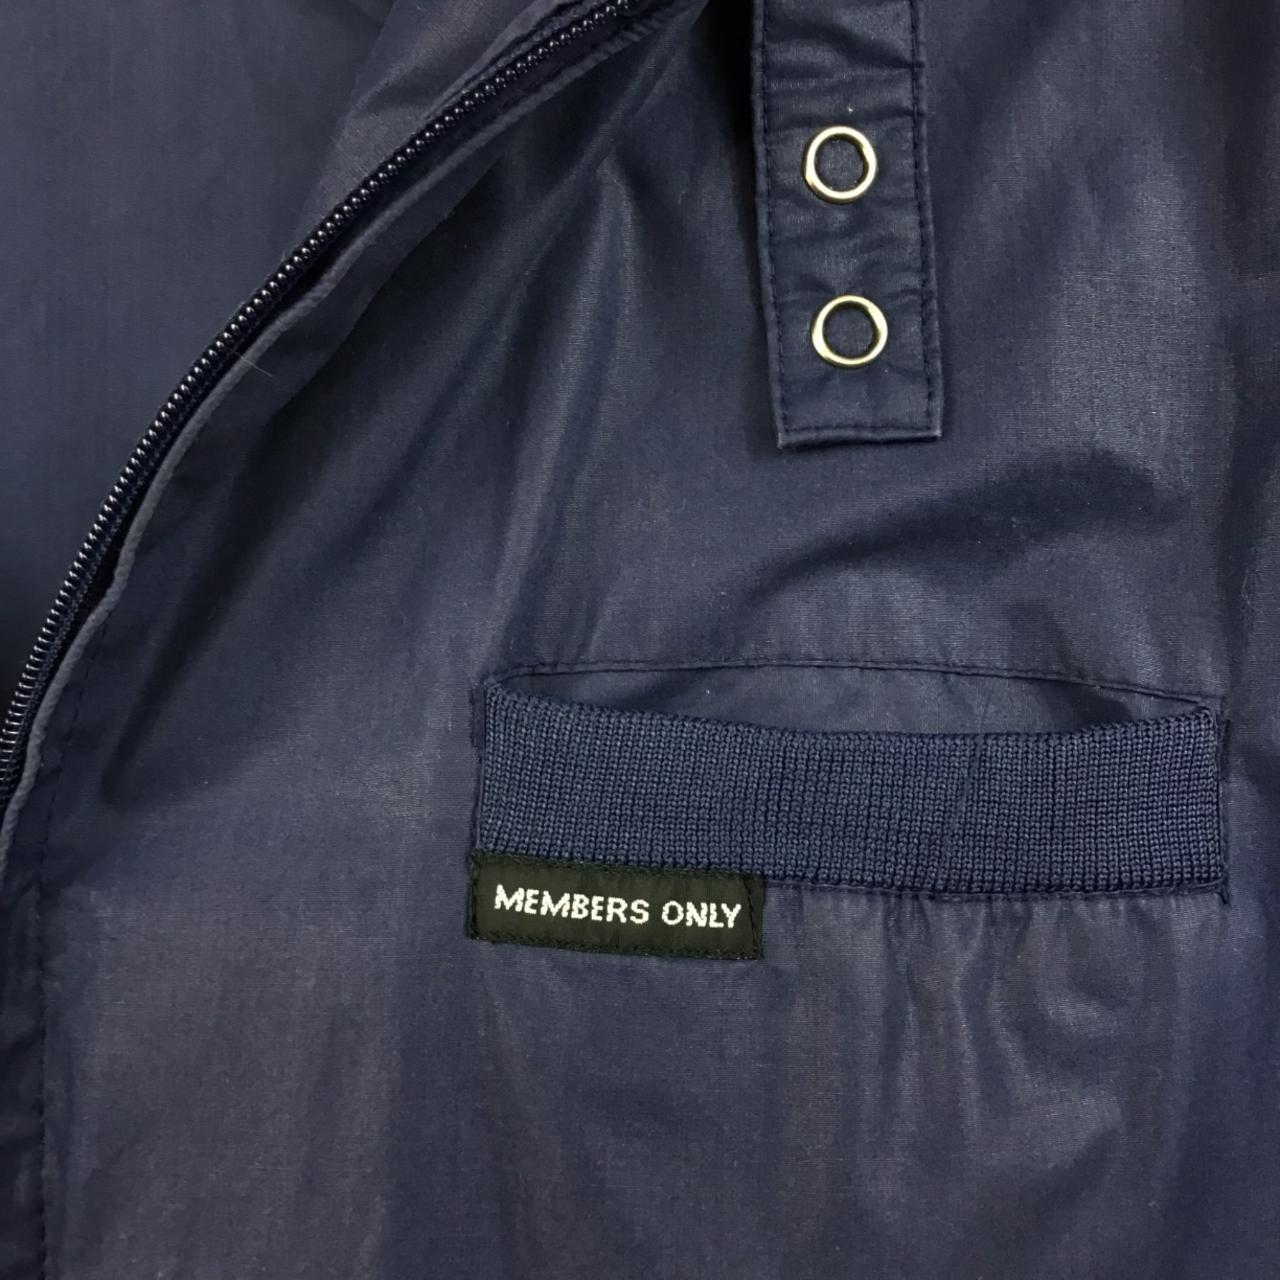 Product Image 3 - Vintage Members only mens jacket